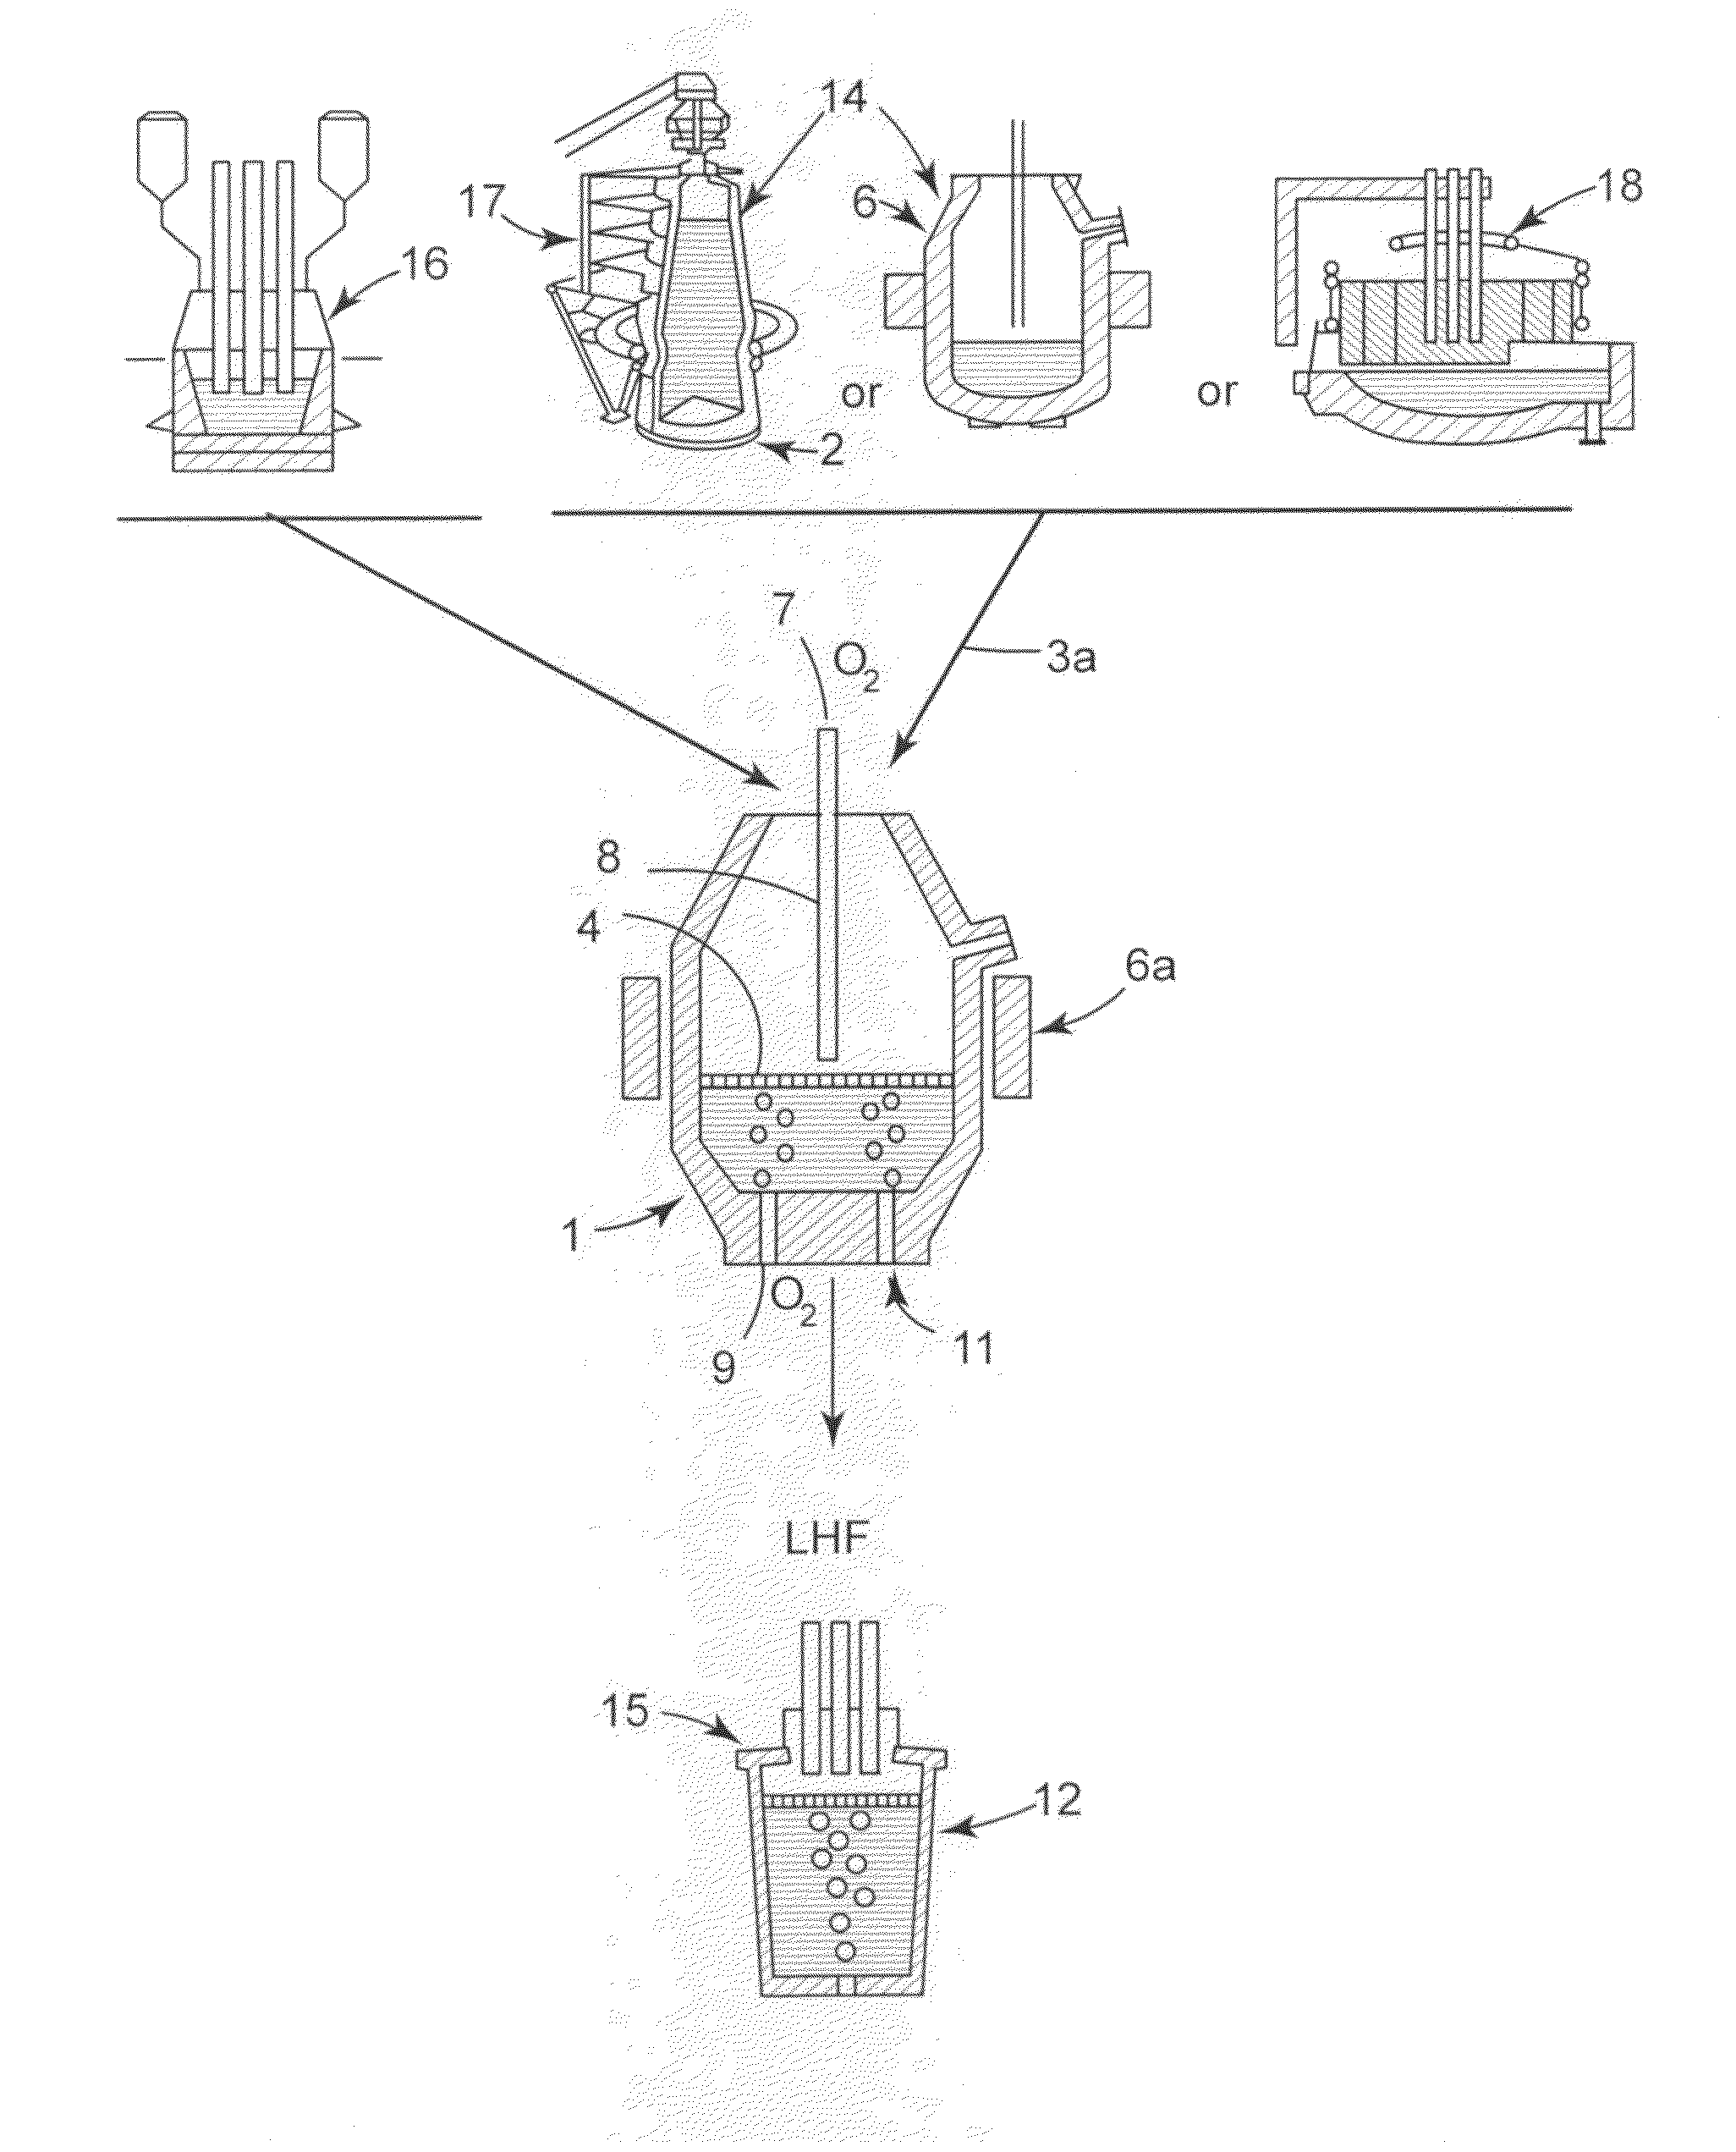 Method of producing steel with high manganese and low carbon content